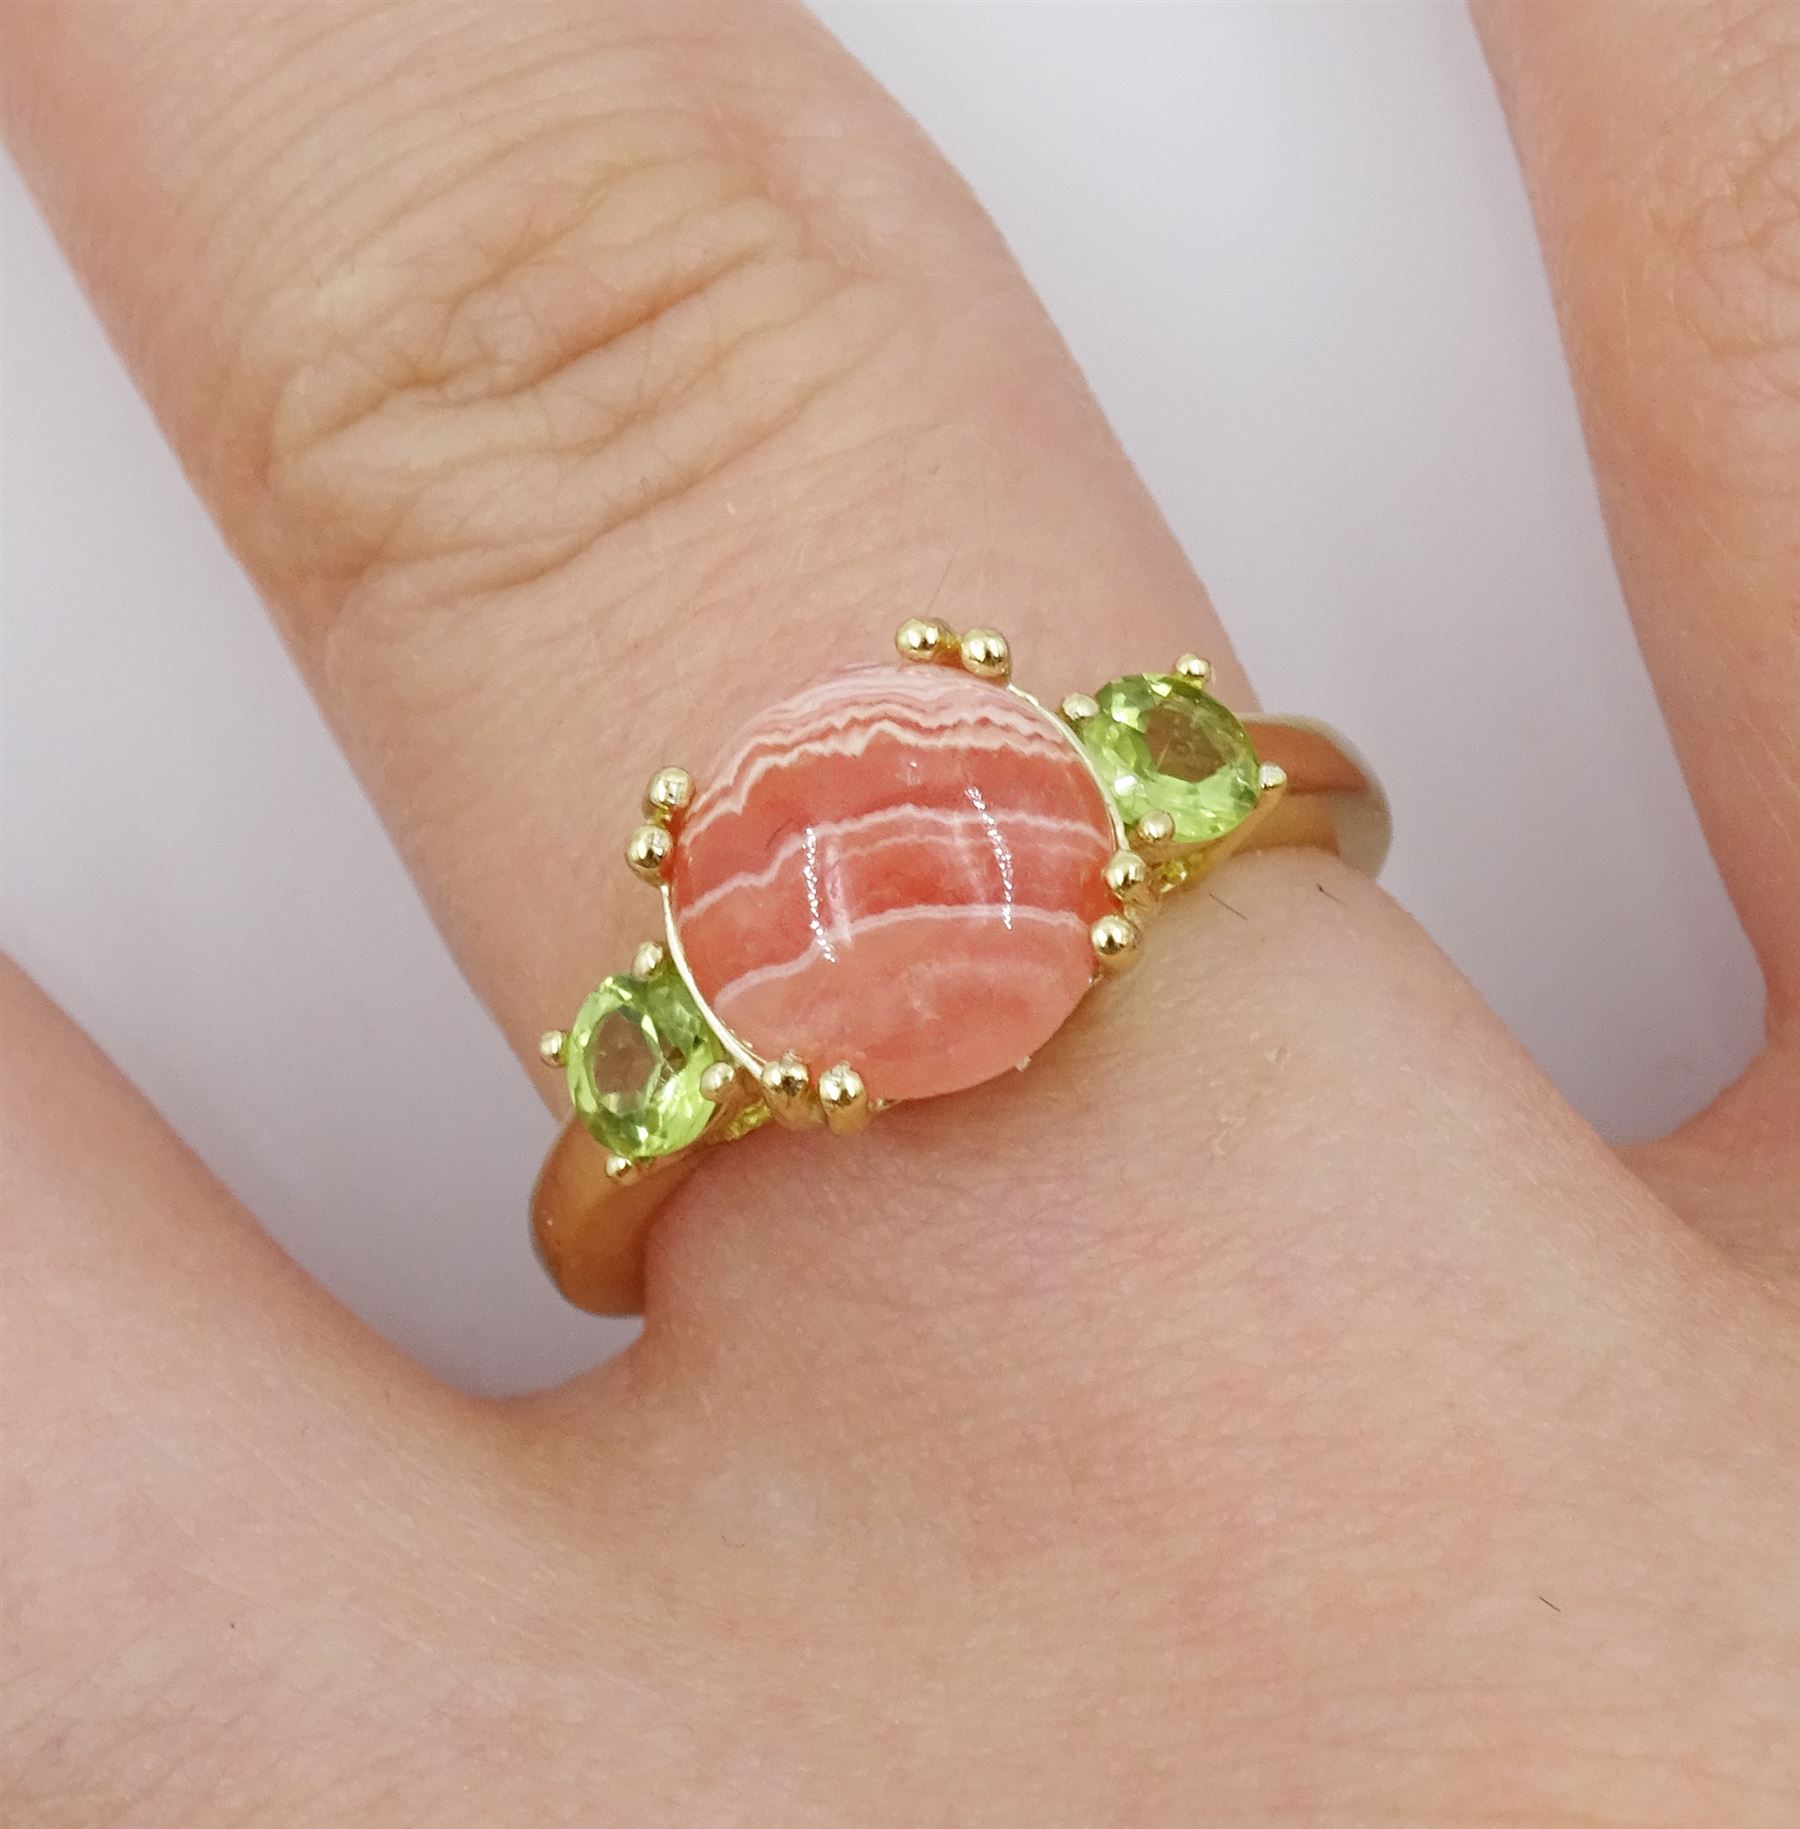 Silver-gilt rhodochrosite and peridot ring - Image 2 of 4